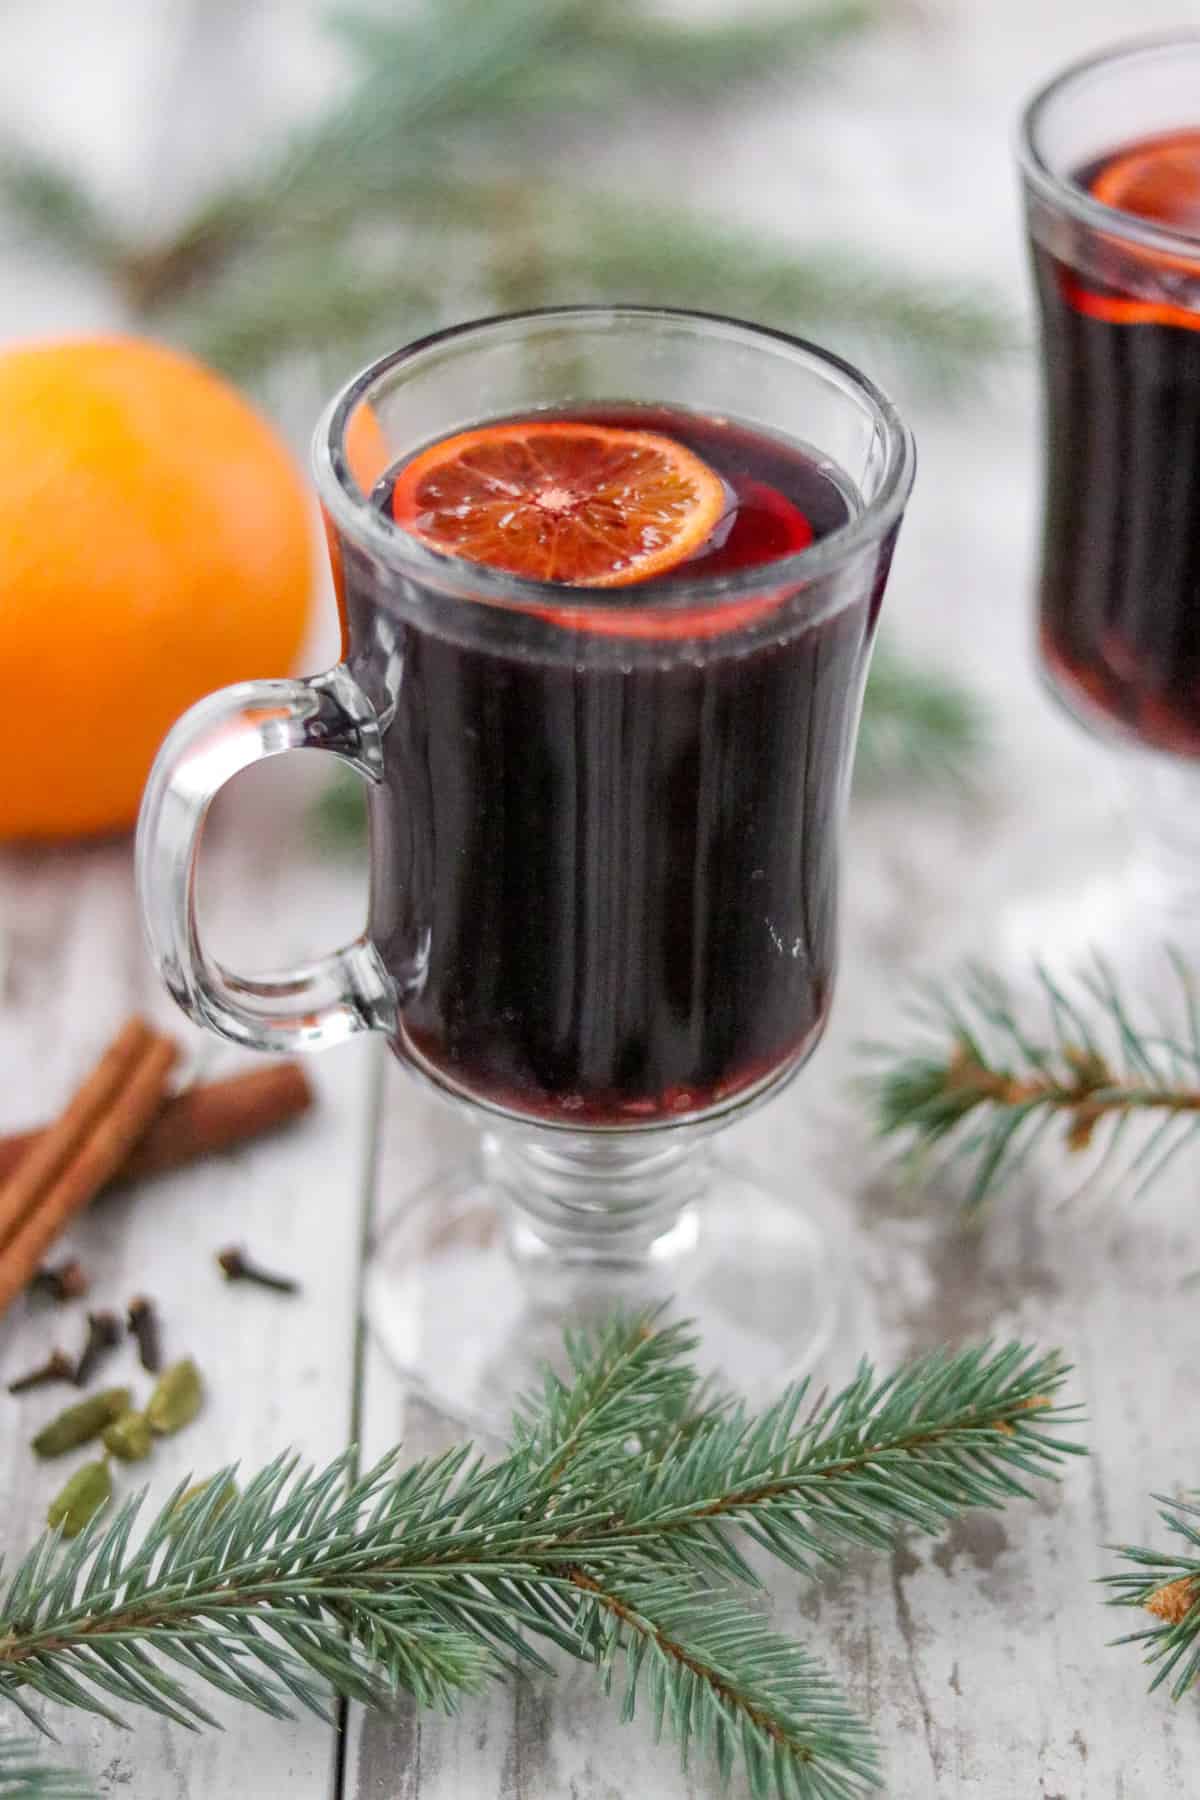 Mulled wine in a glass mug next to an orange and pine branches.